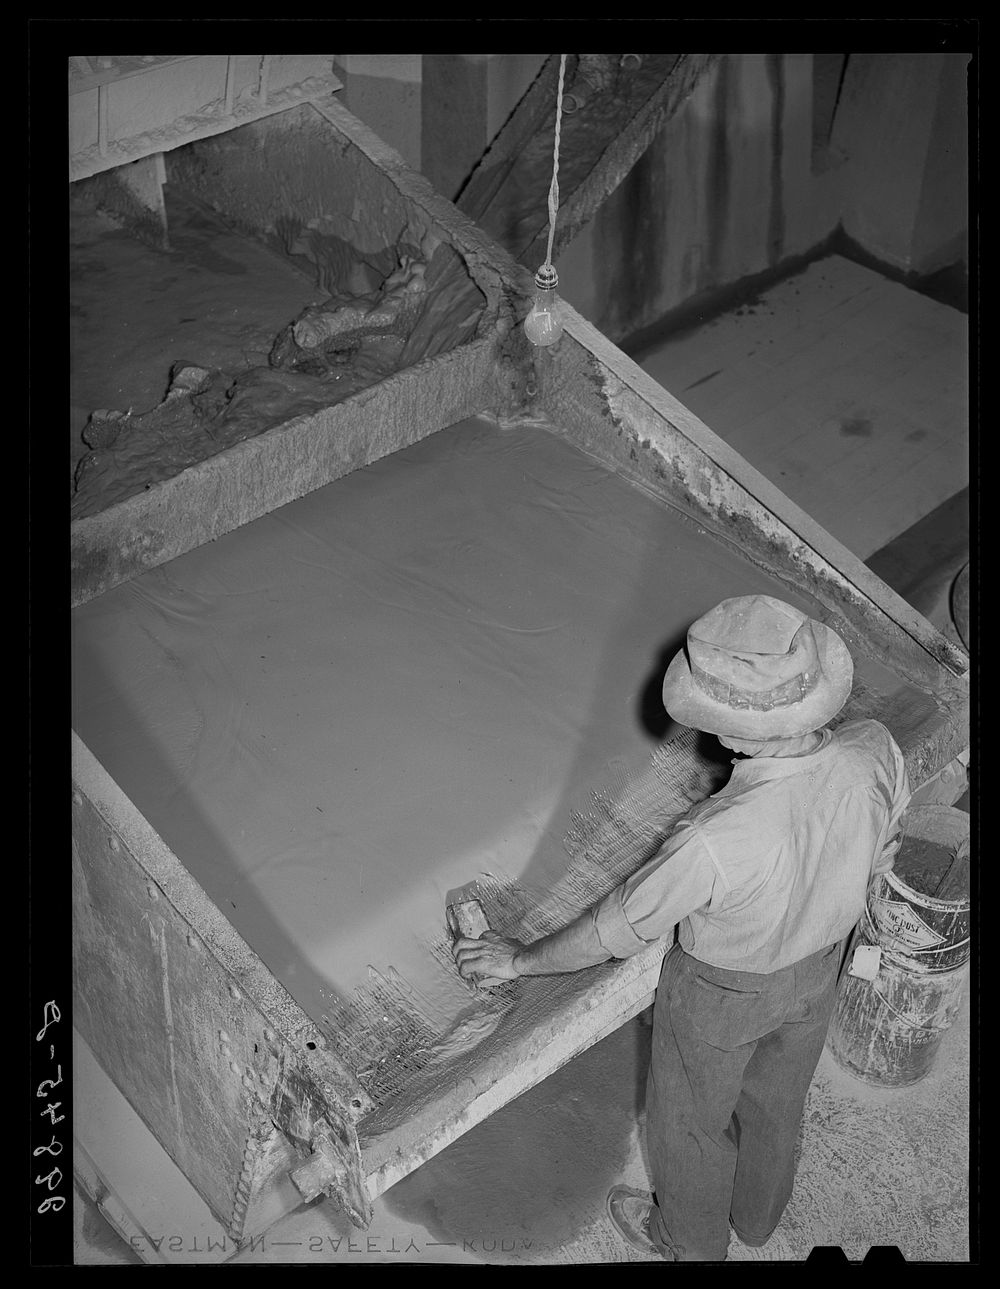 Settling tank in gold ore. Mill. El Dorado Canyon, Nevada. Sourced from the Library of Congress.